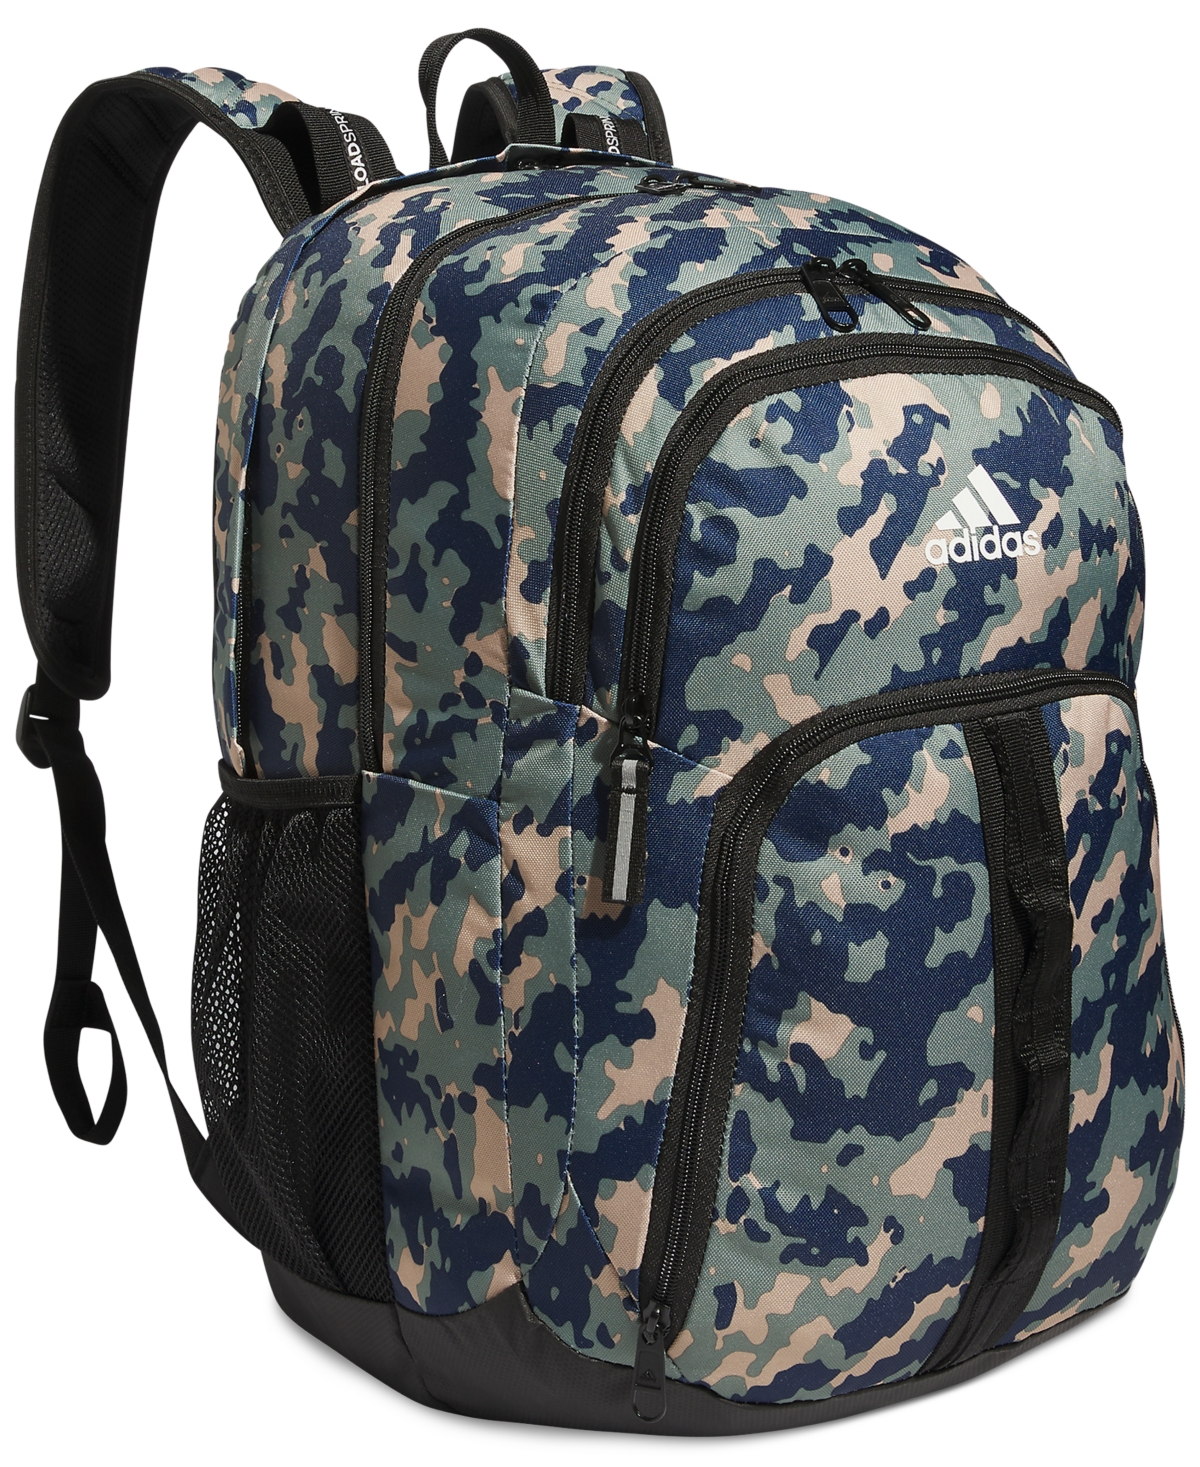 Adidas Originals Prime Backpack In Essential Camo Crew Navy-silver Green,bl